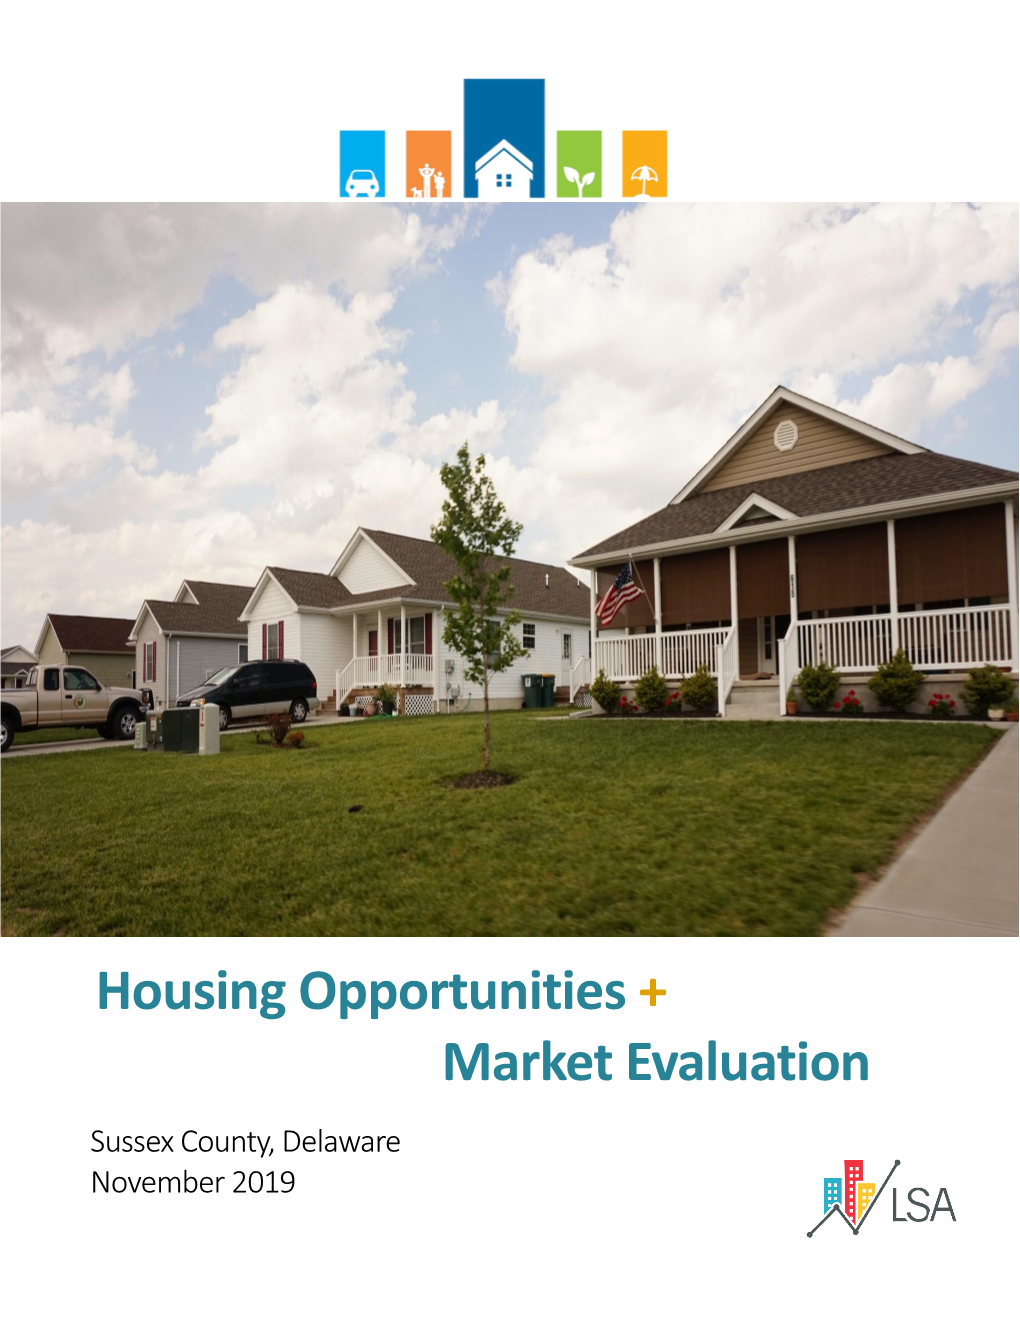 Housing Opportunities and Market Evaluation Presents Strategies Designed to Promote Housing Choice and Economic Vitality for Sussex County’S Residents and Workforce